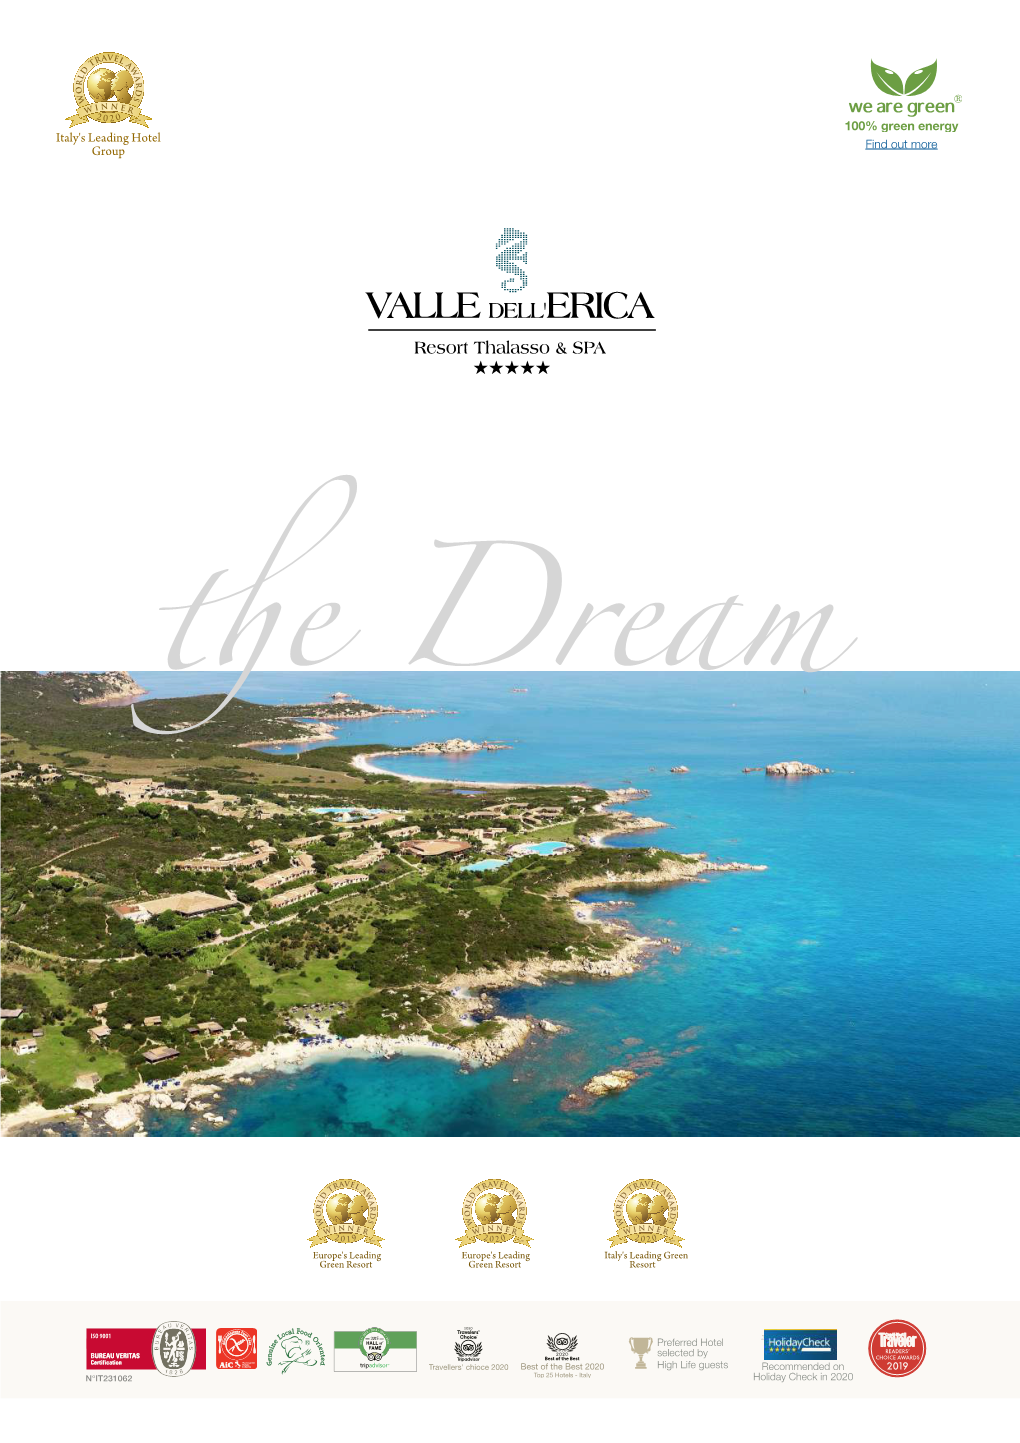 The Dream Wellness Dynamic Relaxing Sportive Happiness Luxuriant -2- the Resort